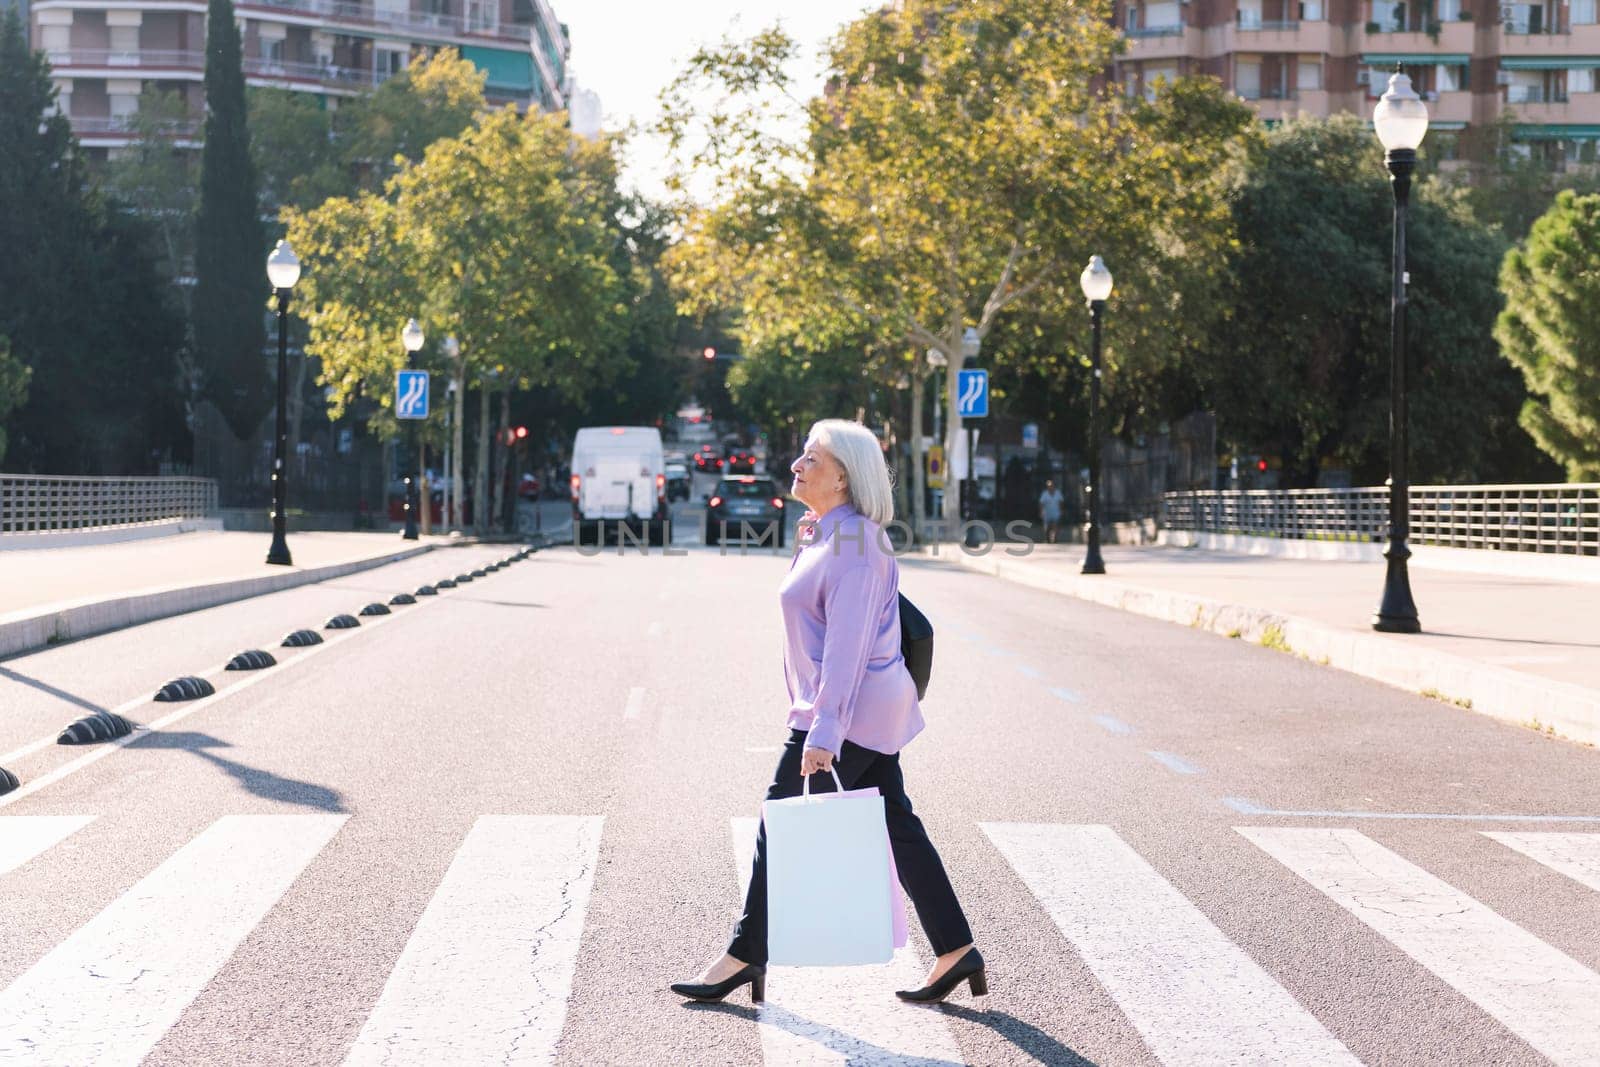 senior woman crossing a city street at a pedestrian crossing with shopping bags in her hand, concept of elderly people leisure and active lifestyle